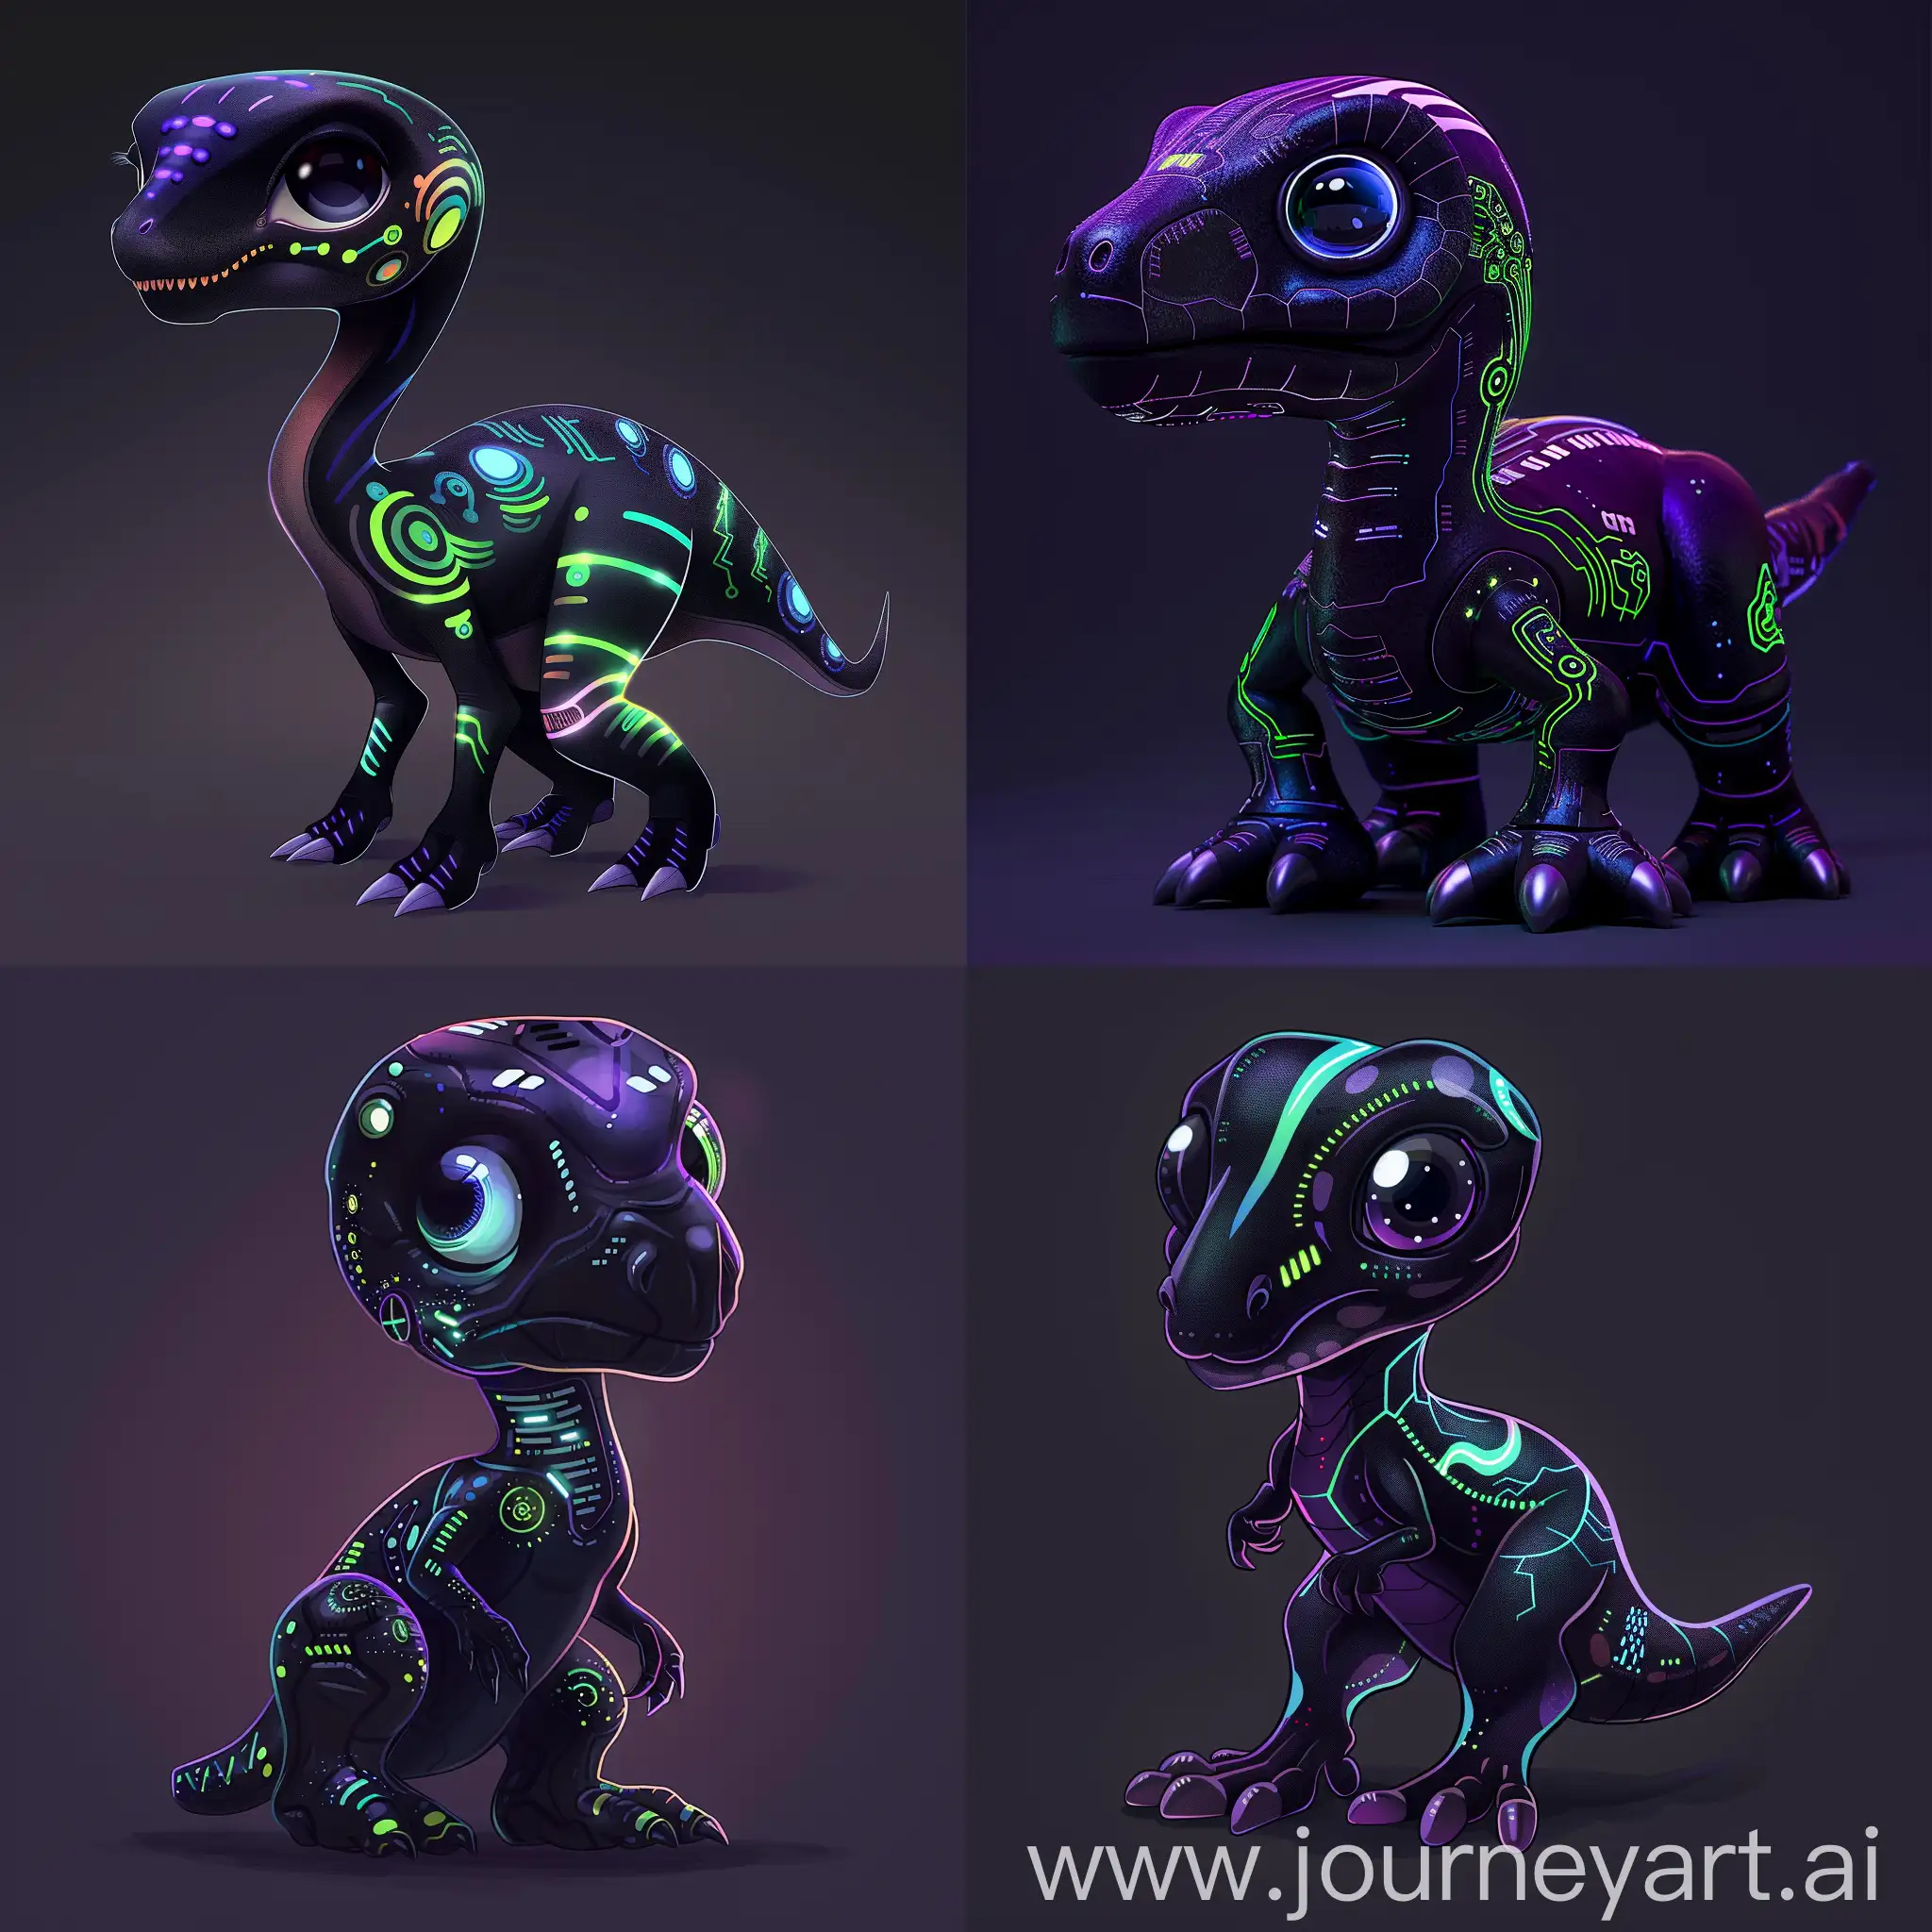 Imagine a miniature dinosaur named CyberRex, a perfect blend of cyberpunk aesthetics and whimsical charm. It embodies the fusion of organic and mechanical, with a sleek body adorned in black and deep purple, highlighted by striking neon green and blue accents. CyberRex's eyes are large and expressive, capable of displaying a wide range of emotions from curiosity and amusement to surprise and cunning. Its cybernetic enhancements gleam with futuristic technology, featuring circuit patterns and glowing lines that hint at its digital prowess. Despite its small size, CyberRex has a big personality, always exploring the cyber world with wit and humor. Its design is not only iconic but also highly meme-able, making it perfect for social media virality and expressive reaction images. Create an image of CyberRex that captures its adventurous spirit and cyberpunk charm, making it instantly recognizable and beloved by the digital community.